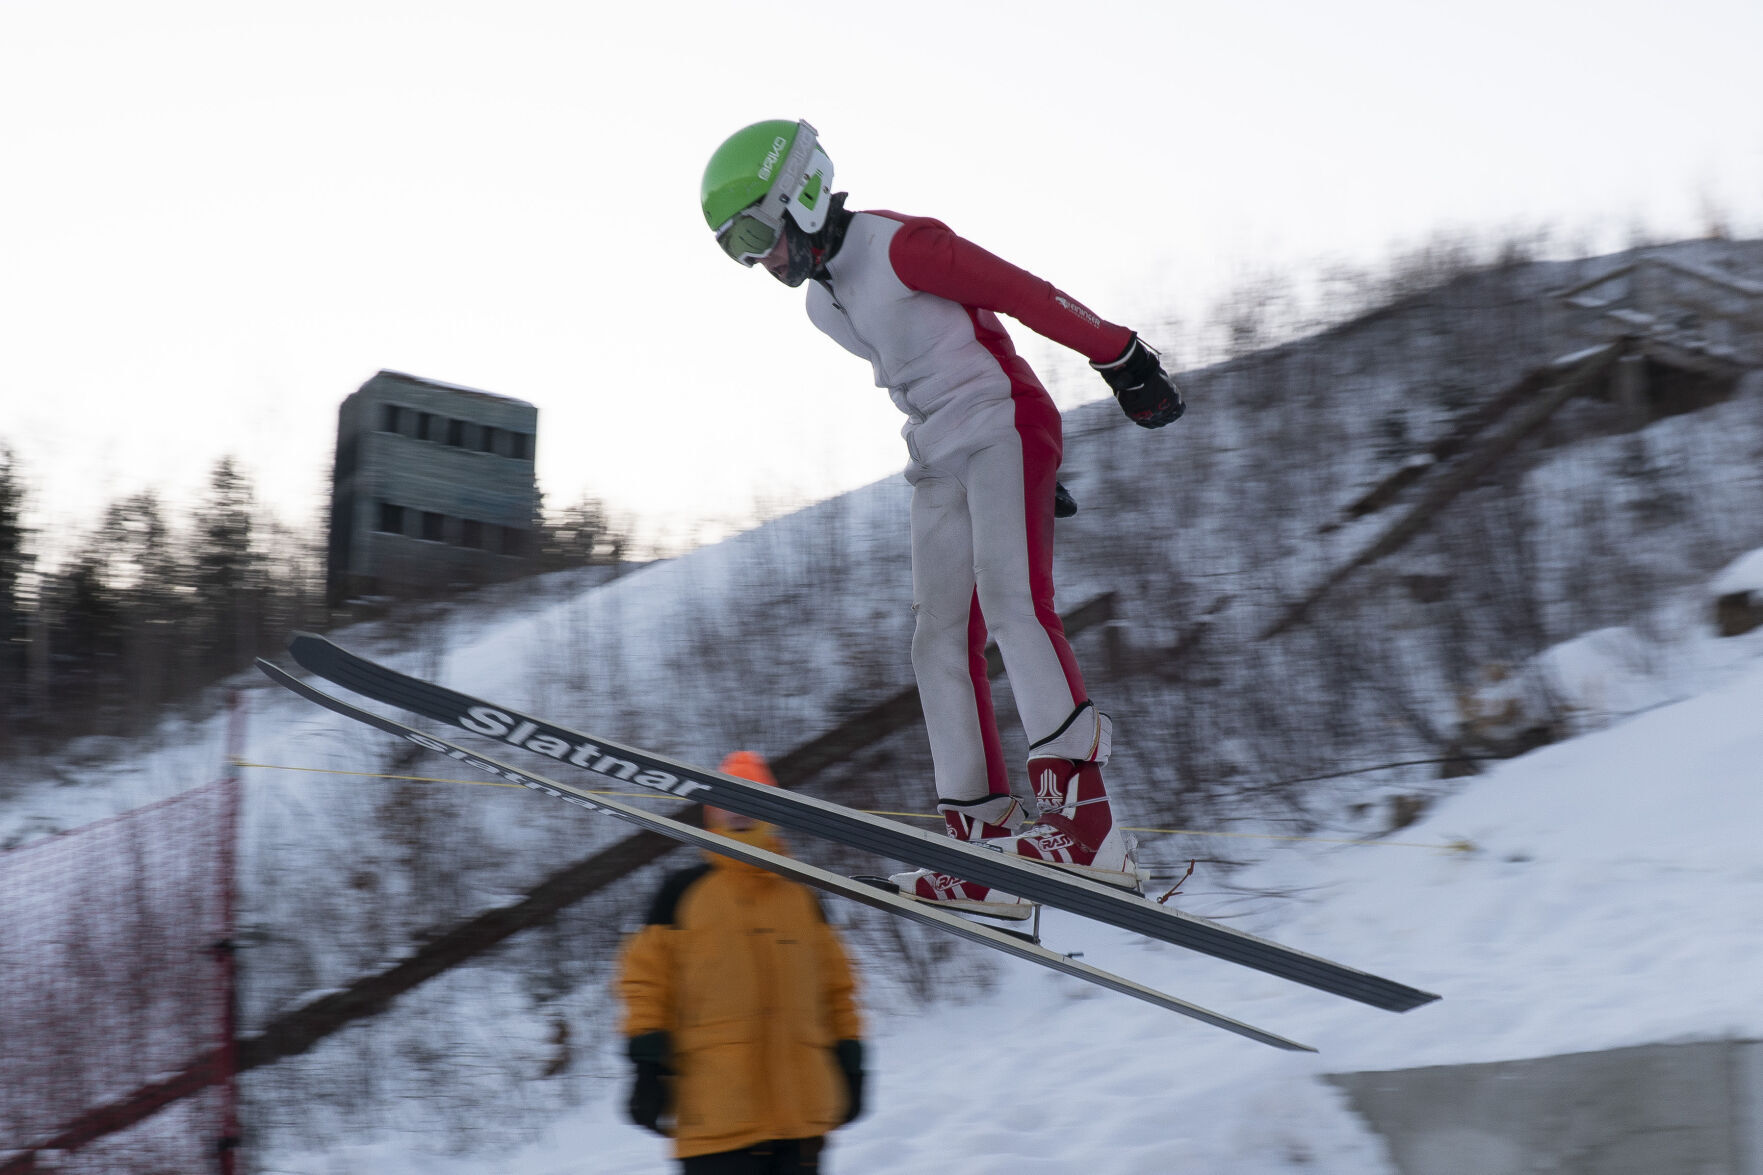 High school ski jumping, unique to NH, is about to take off, say veteran coaches Sports unionleader